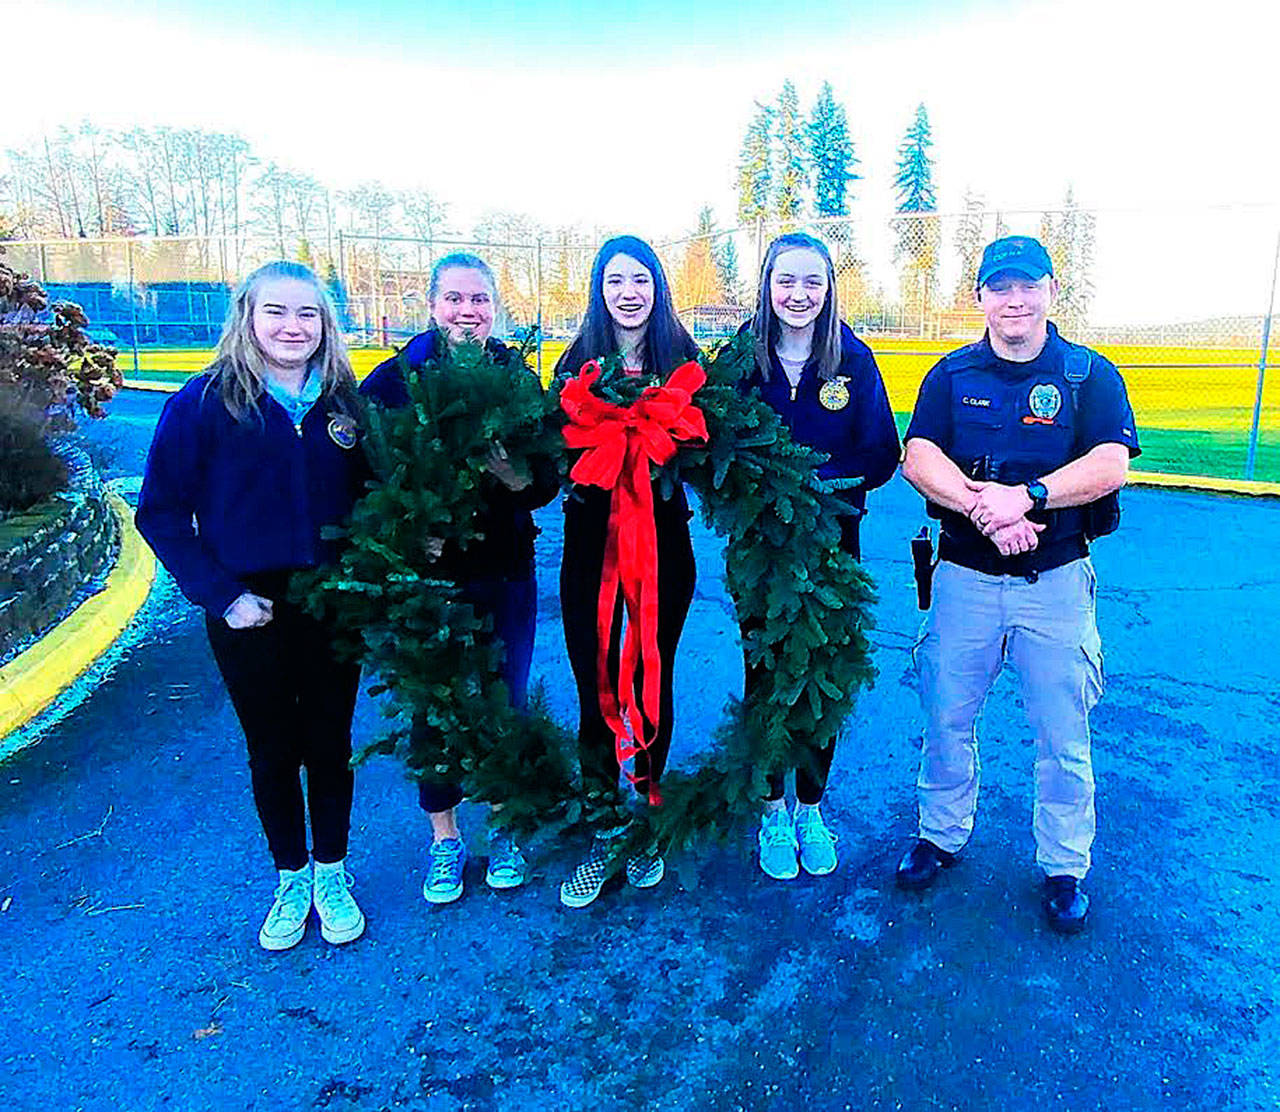 The 40-inch wreath was given to the Duvall Police Department for the third year in a row. From left: Elisabeth Anderson, Bethany Smith, Madison Rose, Emma Chaffin, Officer Cory Clark. Photo by Sarah Thomas